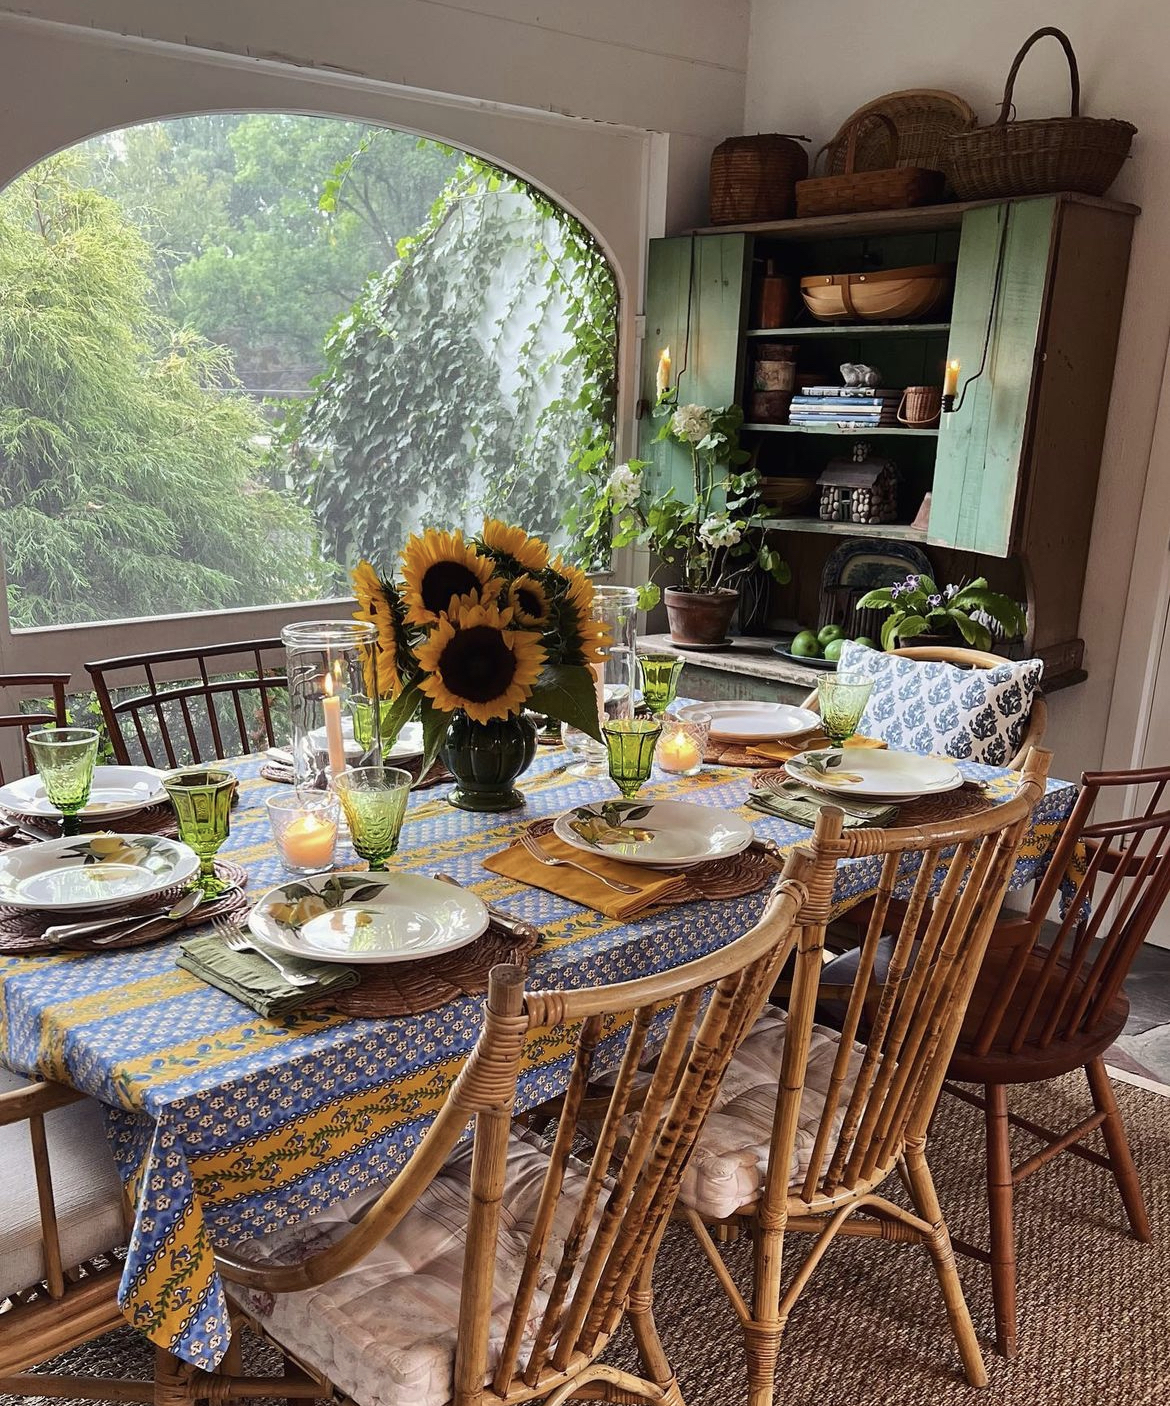 A cottage-inspired tablescape featuring a mix of vintage chairs and colorful place settings upon a blue and gold patterned tablecloth centered by a bouquet of sunflowers.